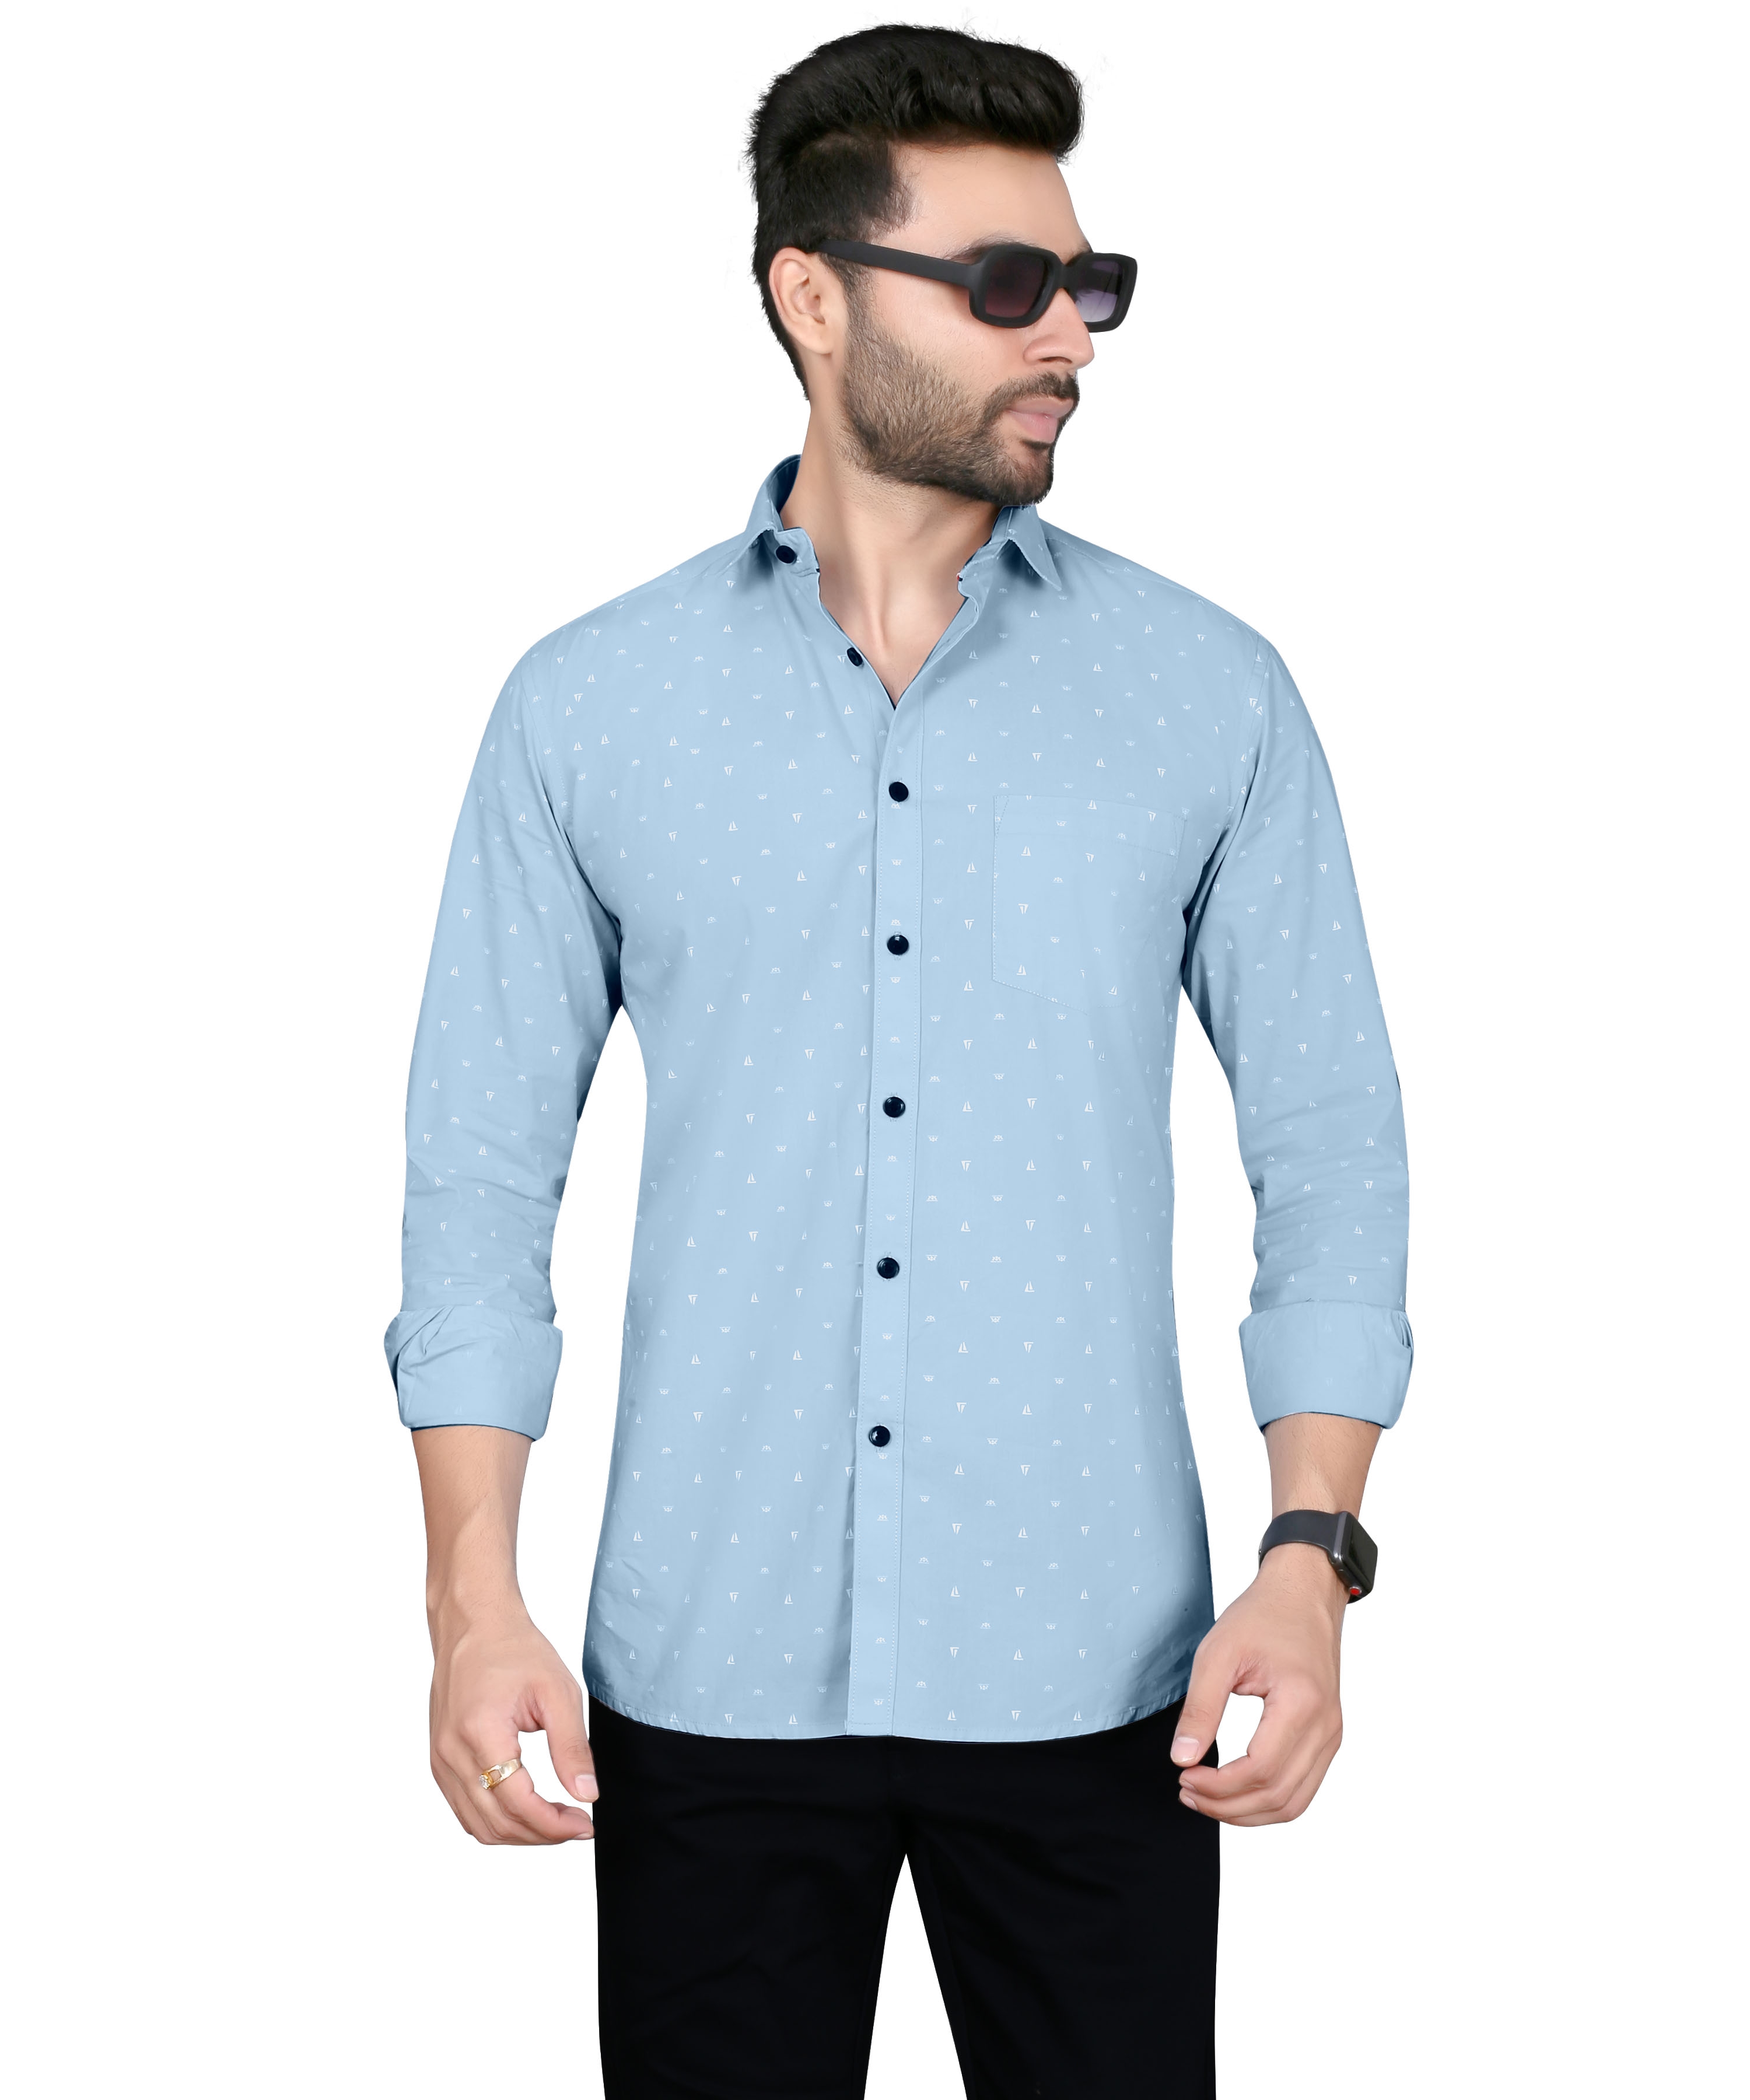 5th Anfold | Blue Printed Casual Shirt